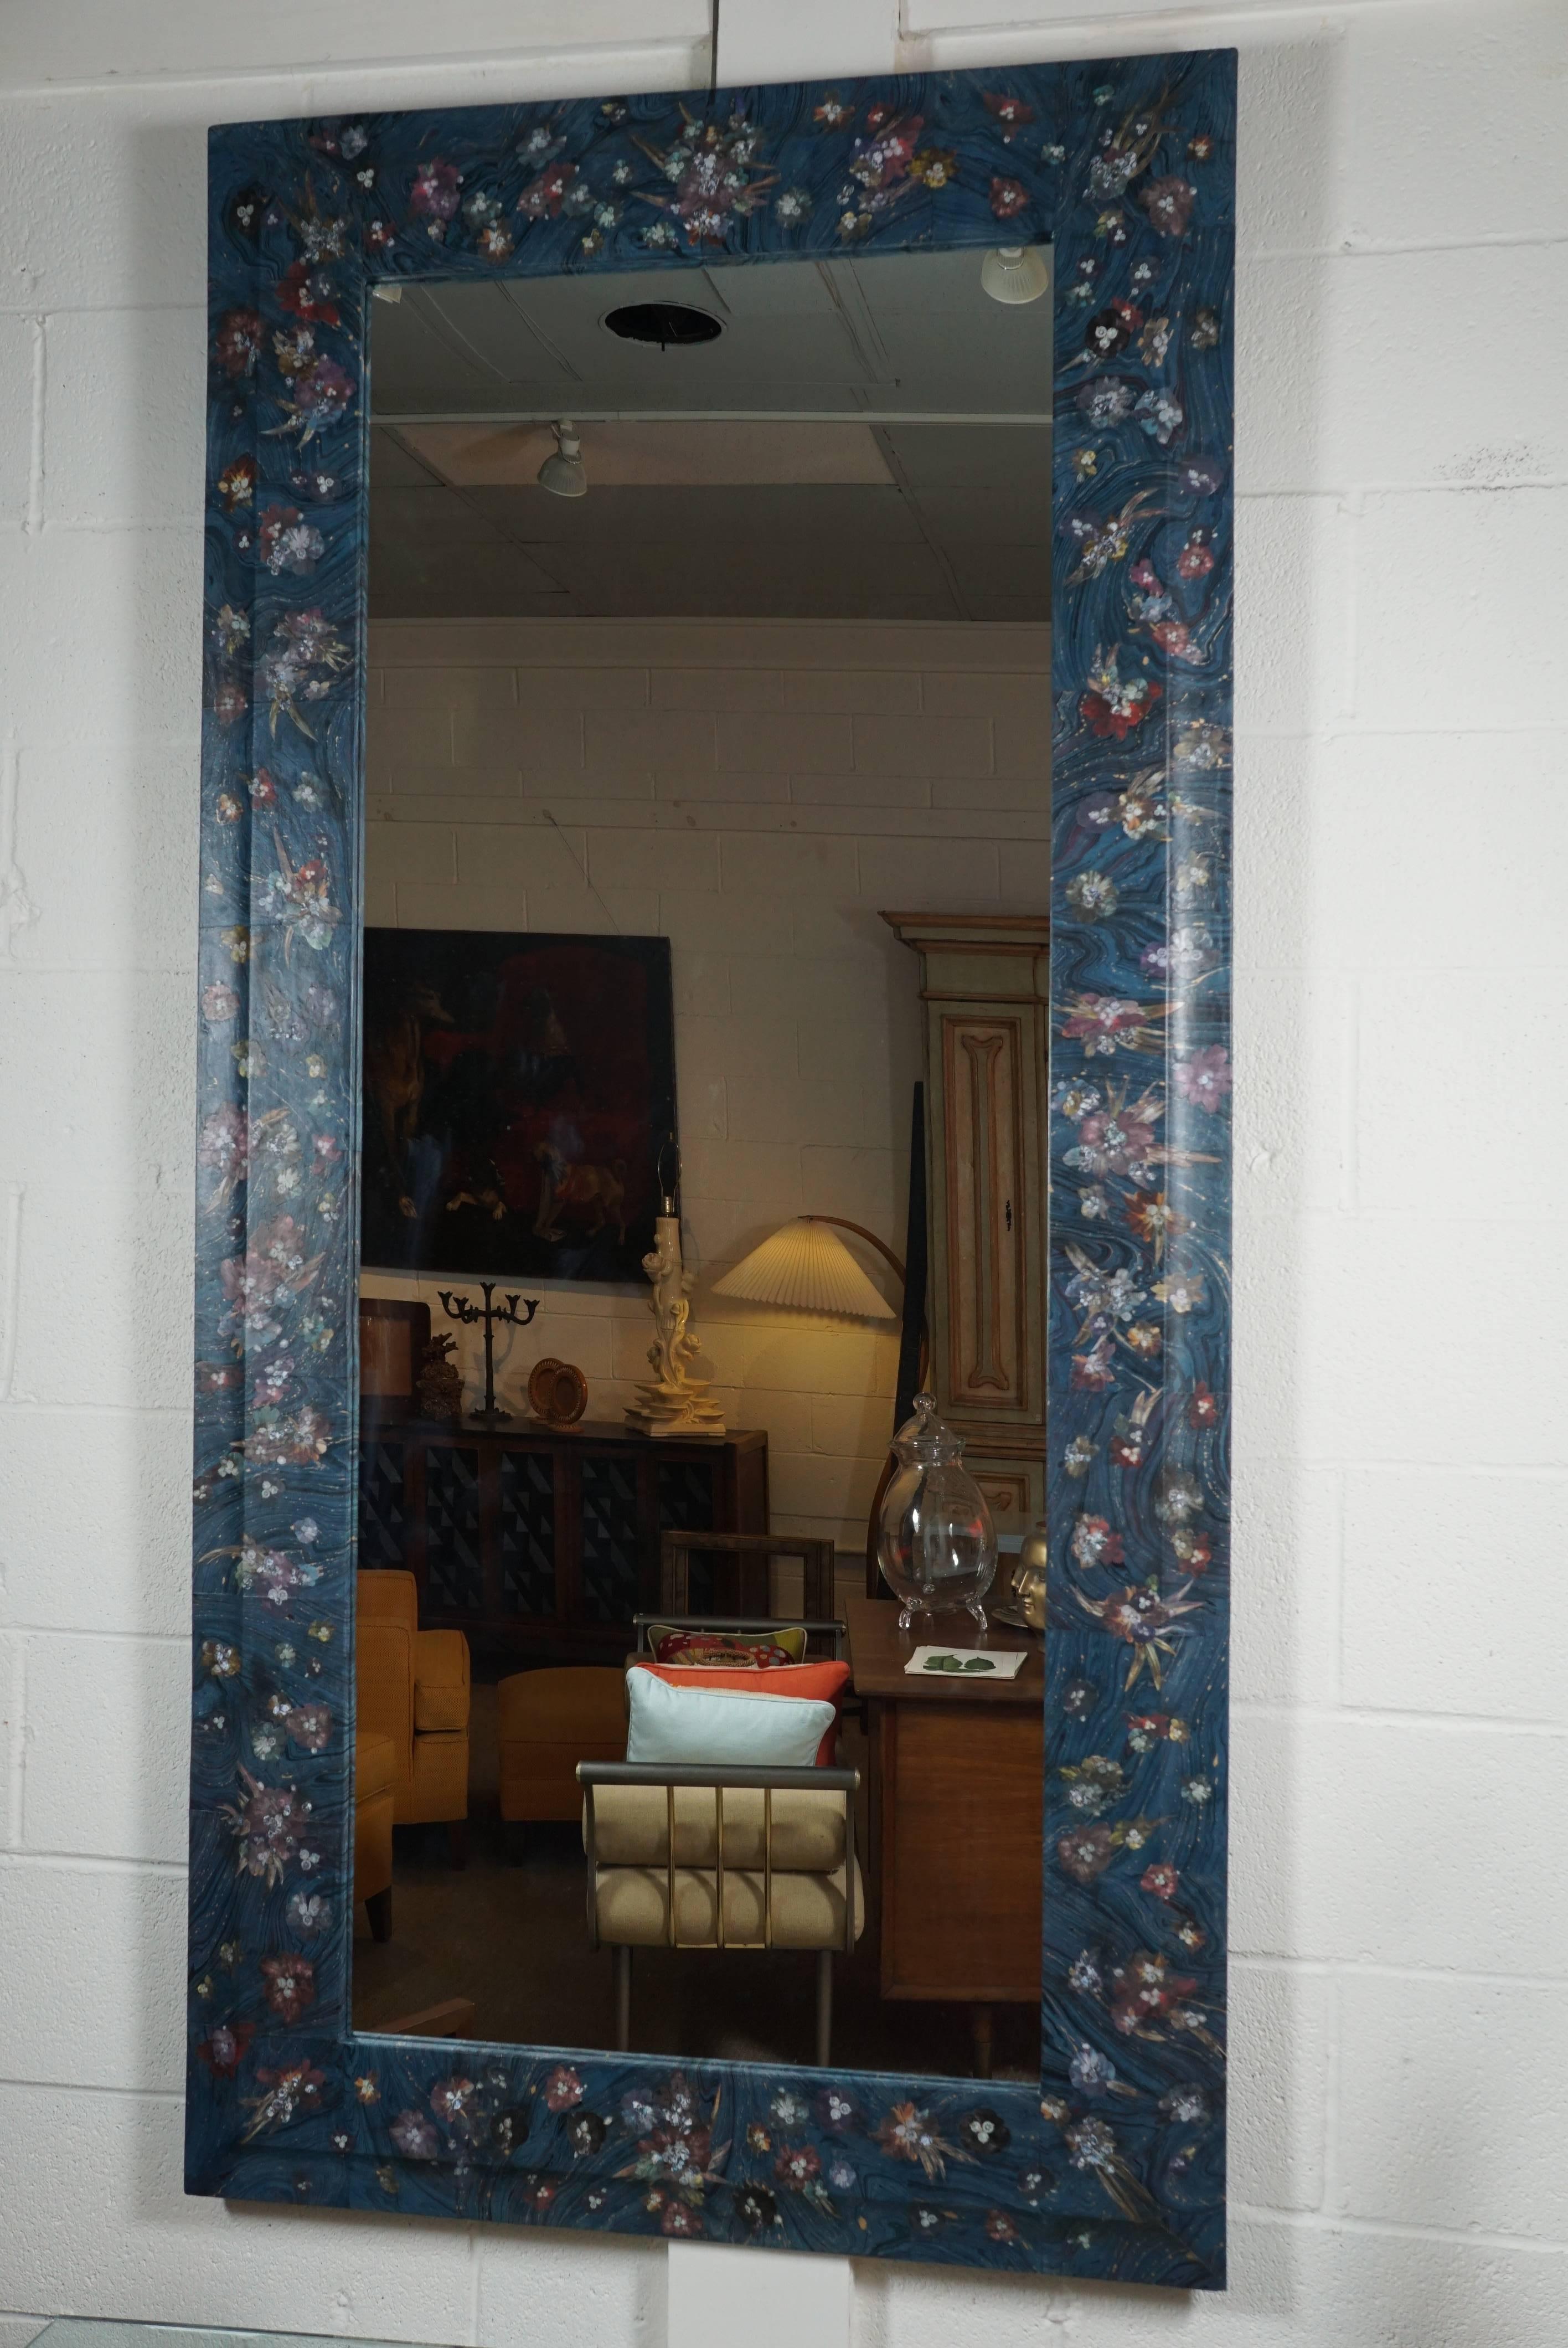 Here is a beautiful and unique full length decoupage mirror in a blue marbleized paper with floating images of flowers and diamonds and palm fronds. The flowers are images of glass and diamond jewelry. The intricately cut images are superimposed to